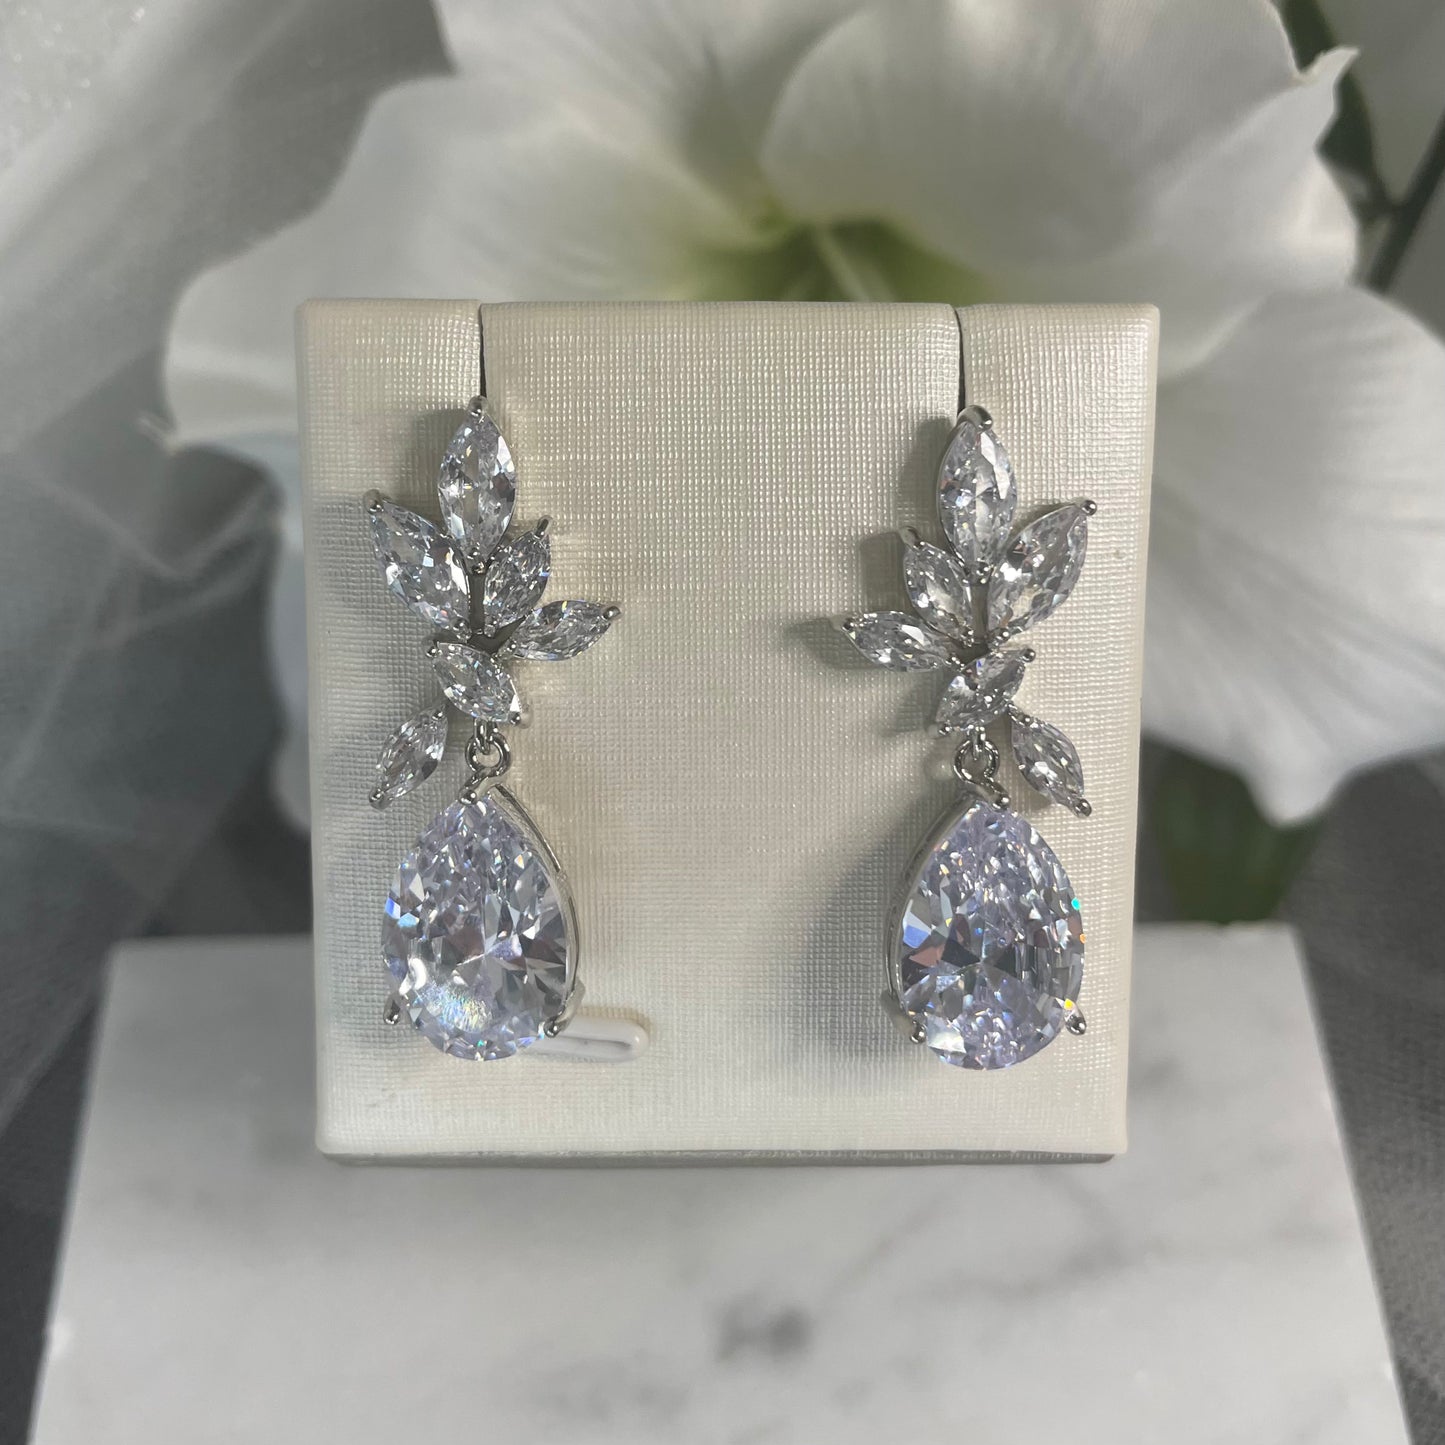 Dara Bridal Wedding Earrings with Leaf-Shaped CZ Stones and Water Drop Crystal - Divine Bridal